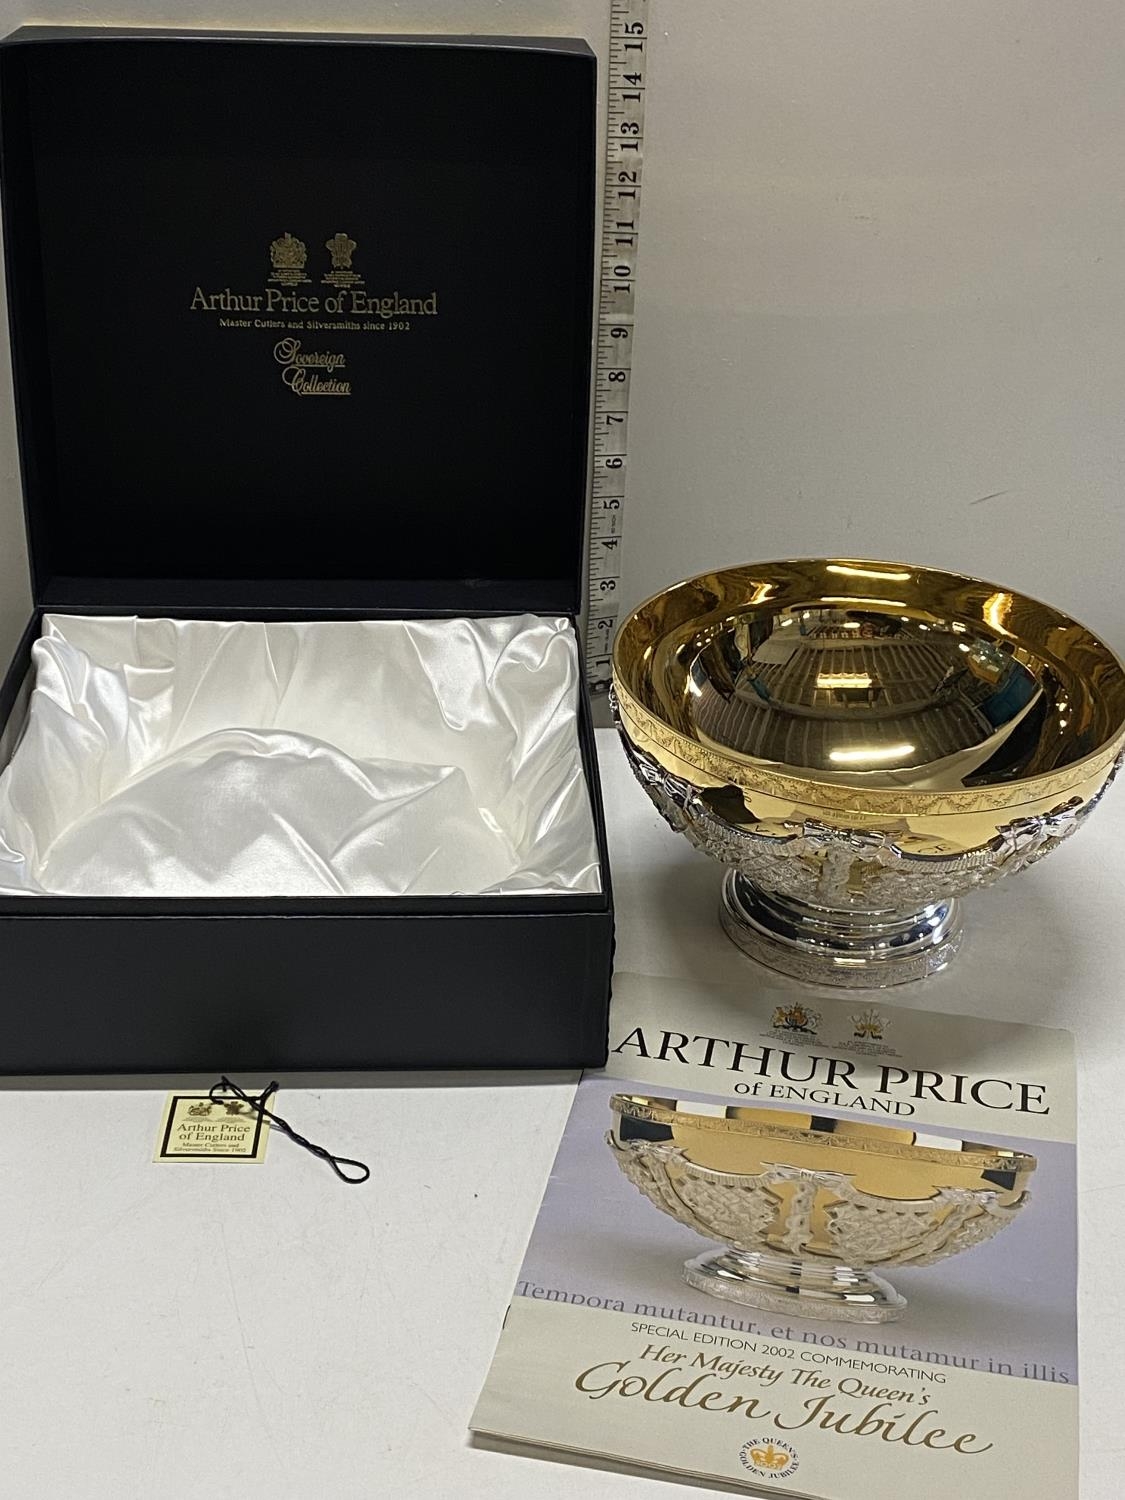 A boxed Arthur Price limited special edition silver plated bowl commemorating HM the Queen Golden